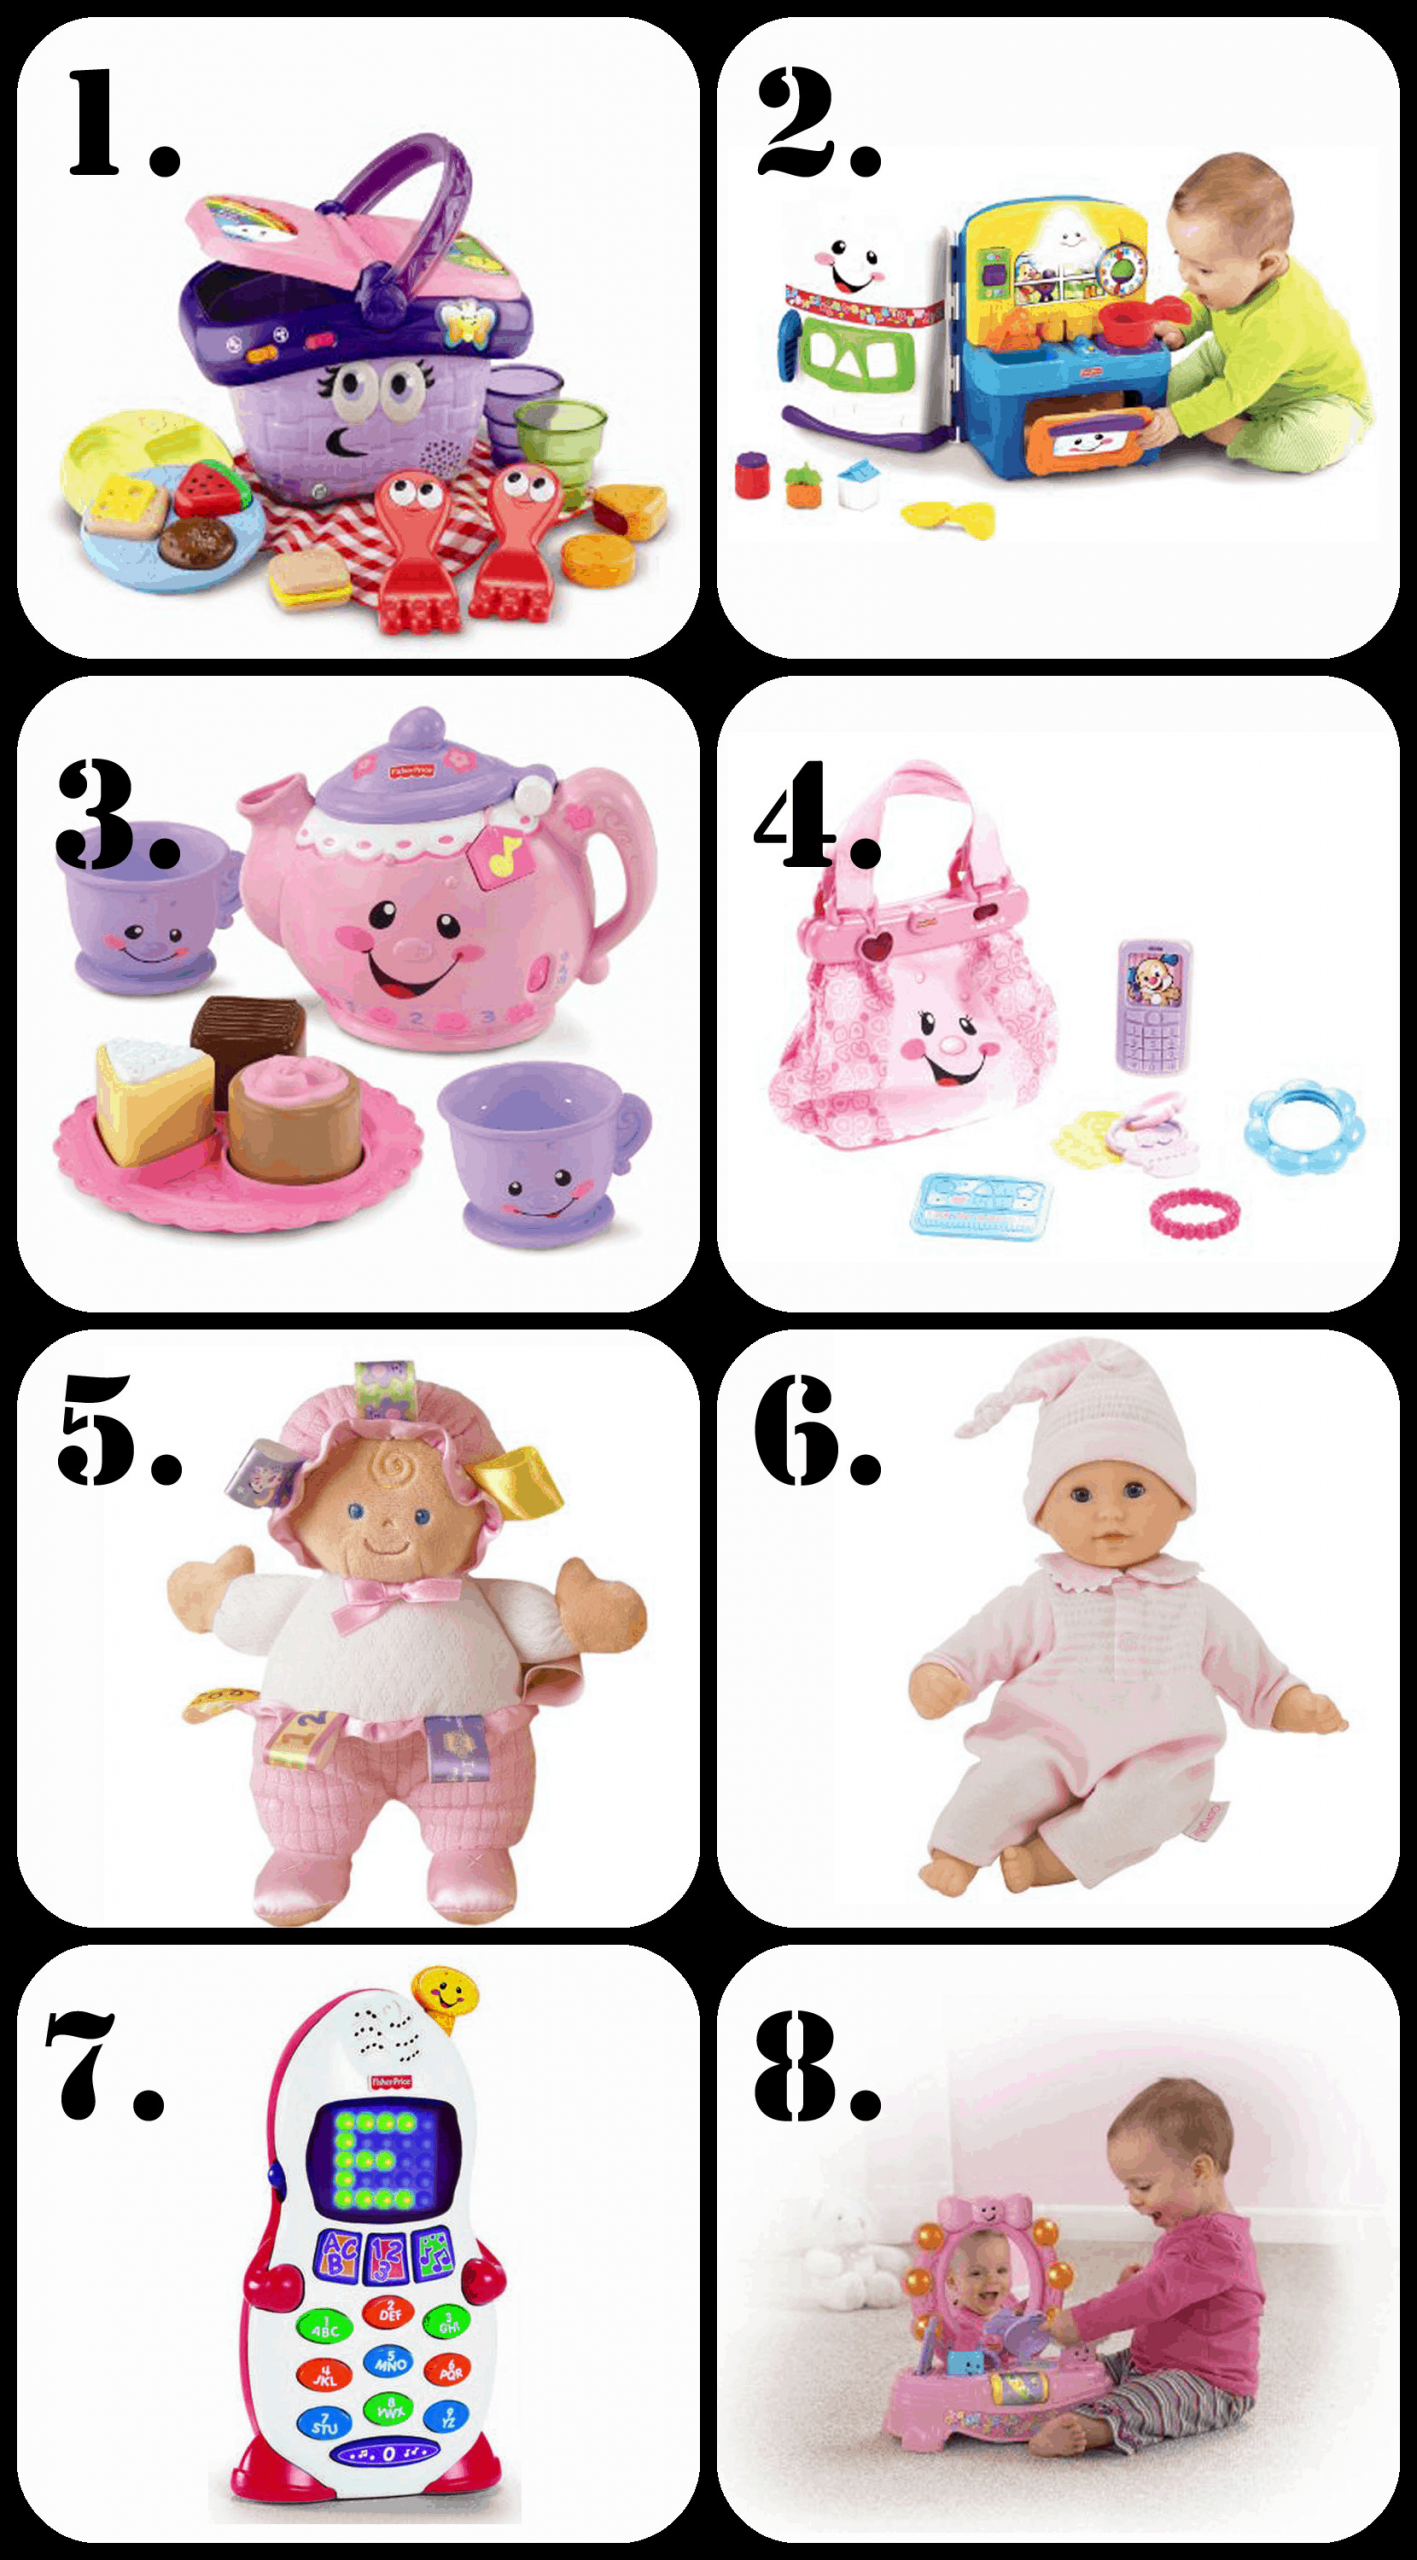 Best One Year Old Birthday Gifts
 The Ultimate List of Gift Ideas for a 1 Year Old Girl